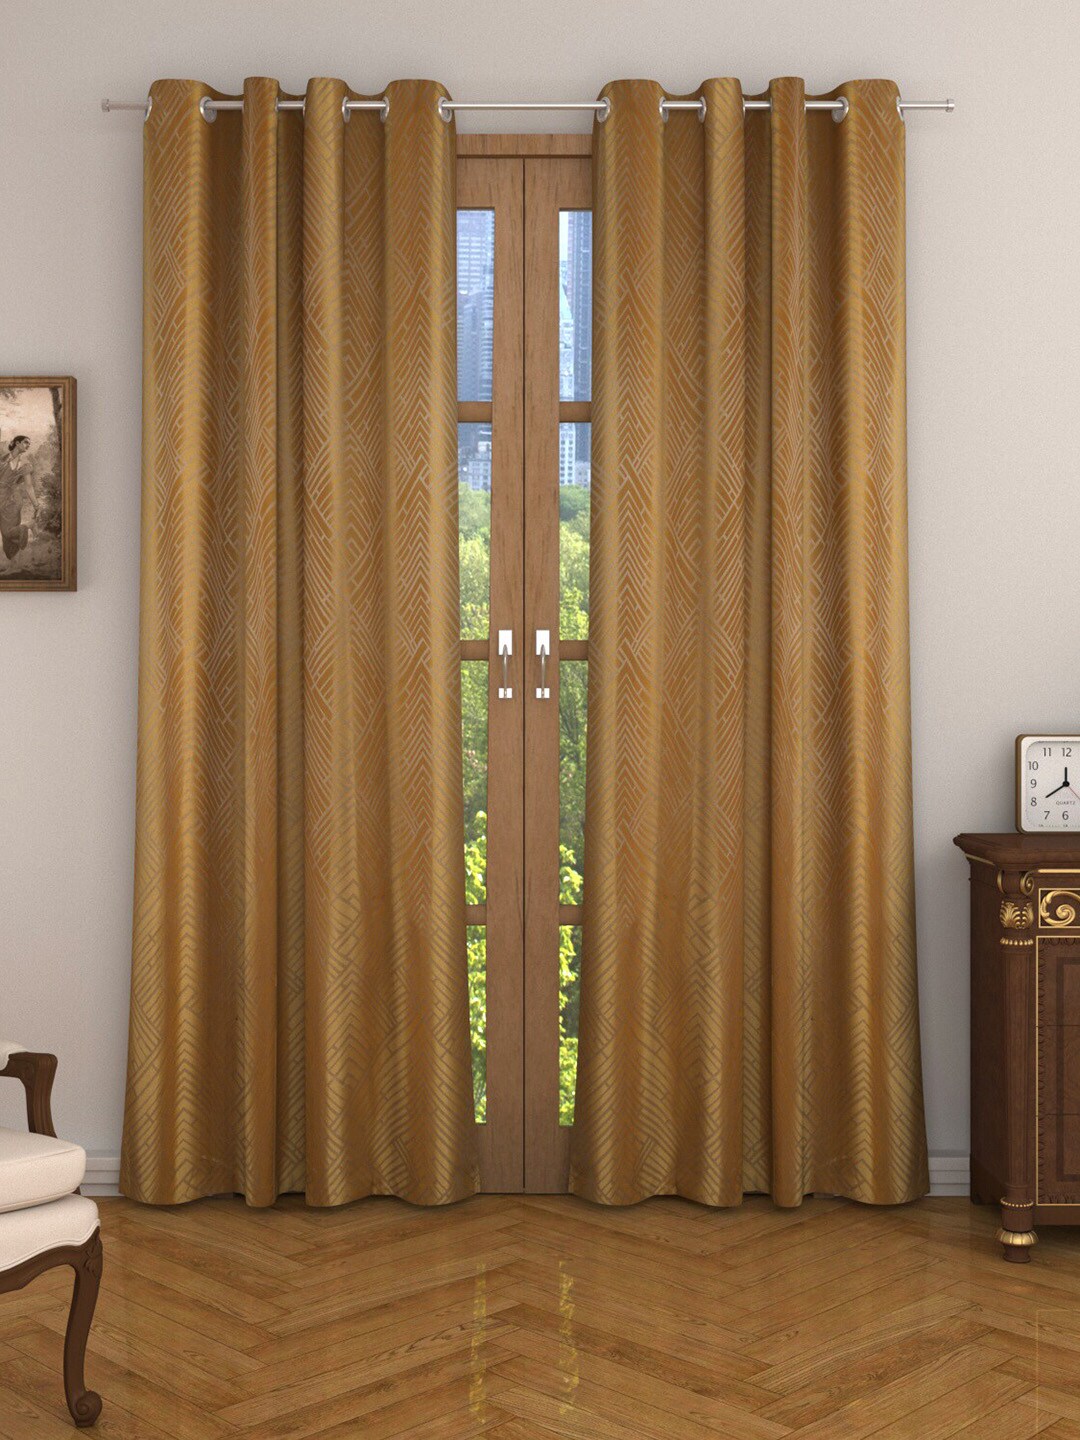 HomeTown Mustard Set of 2 Striped Black Out Door Curtain Price in India